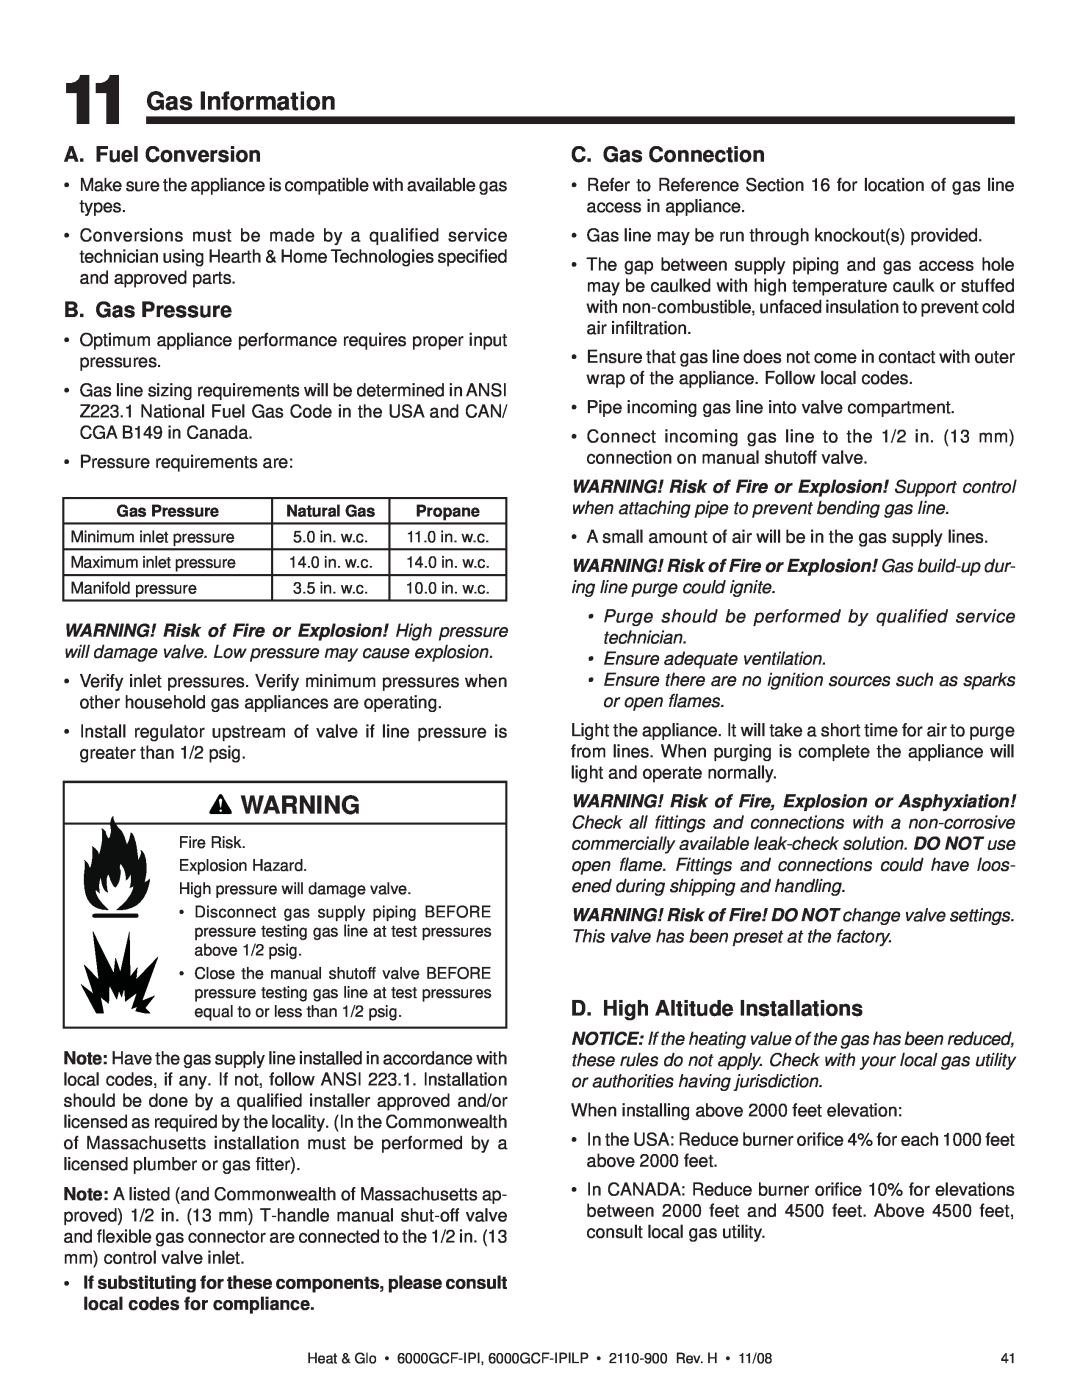 Hearth and Home Technologies 6000GCF-IPI Gas Information, A. Fuel Conversion, B. Gas Pressure, C. Gas Connection 